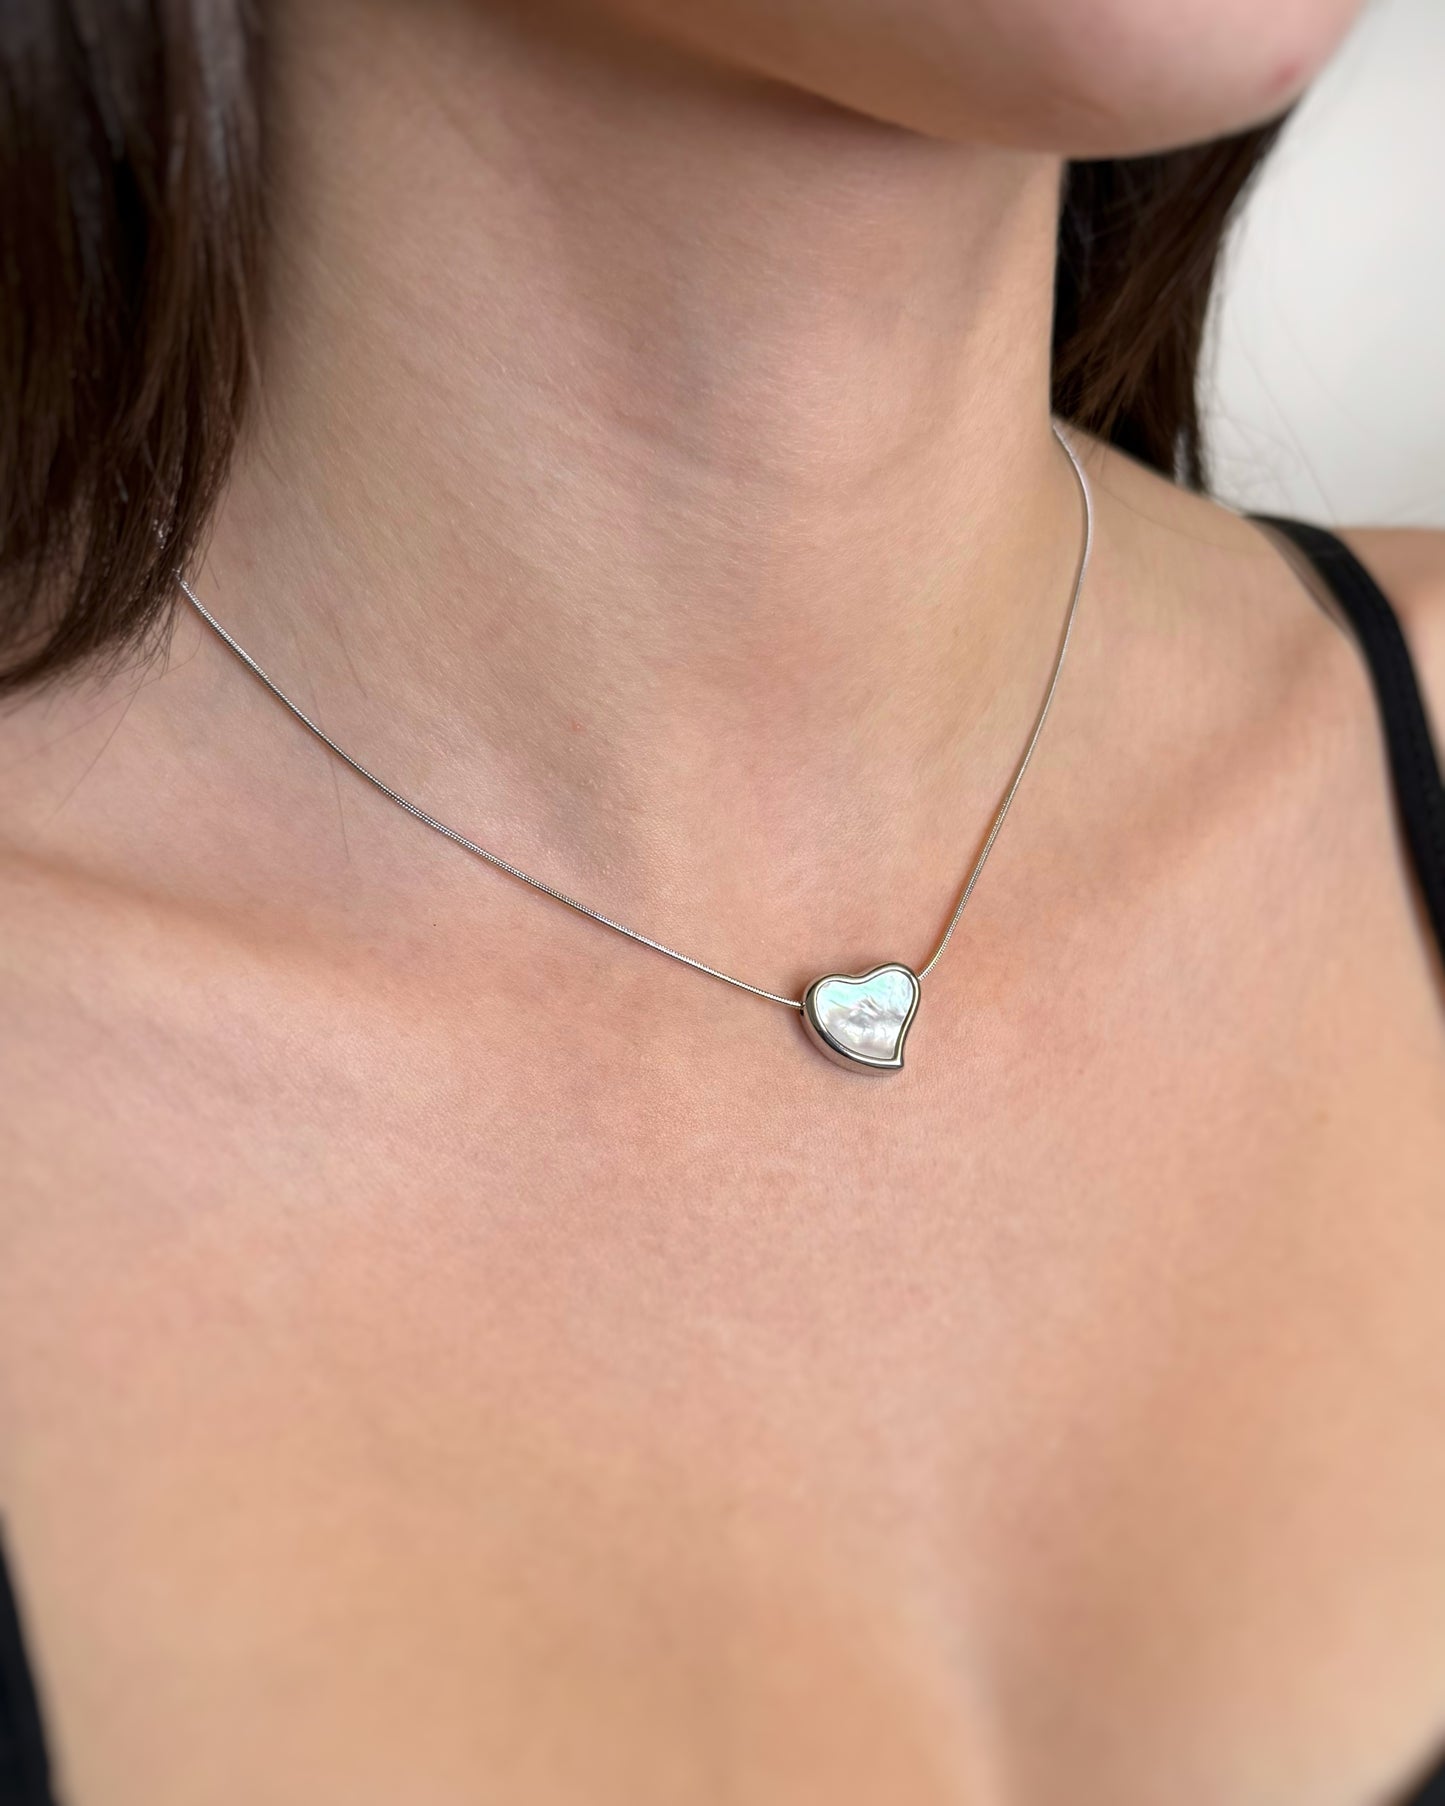 HEART MOTHER-OF-PEARL PENDANT NECKLACE